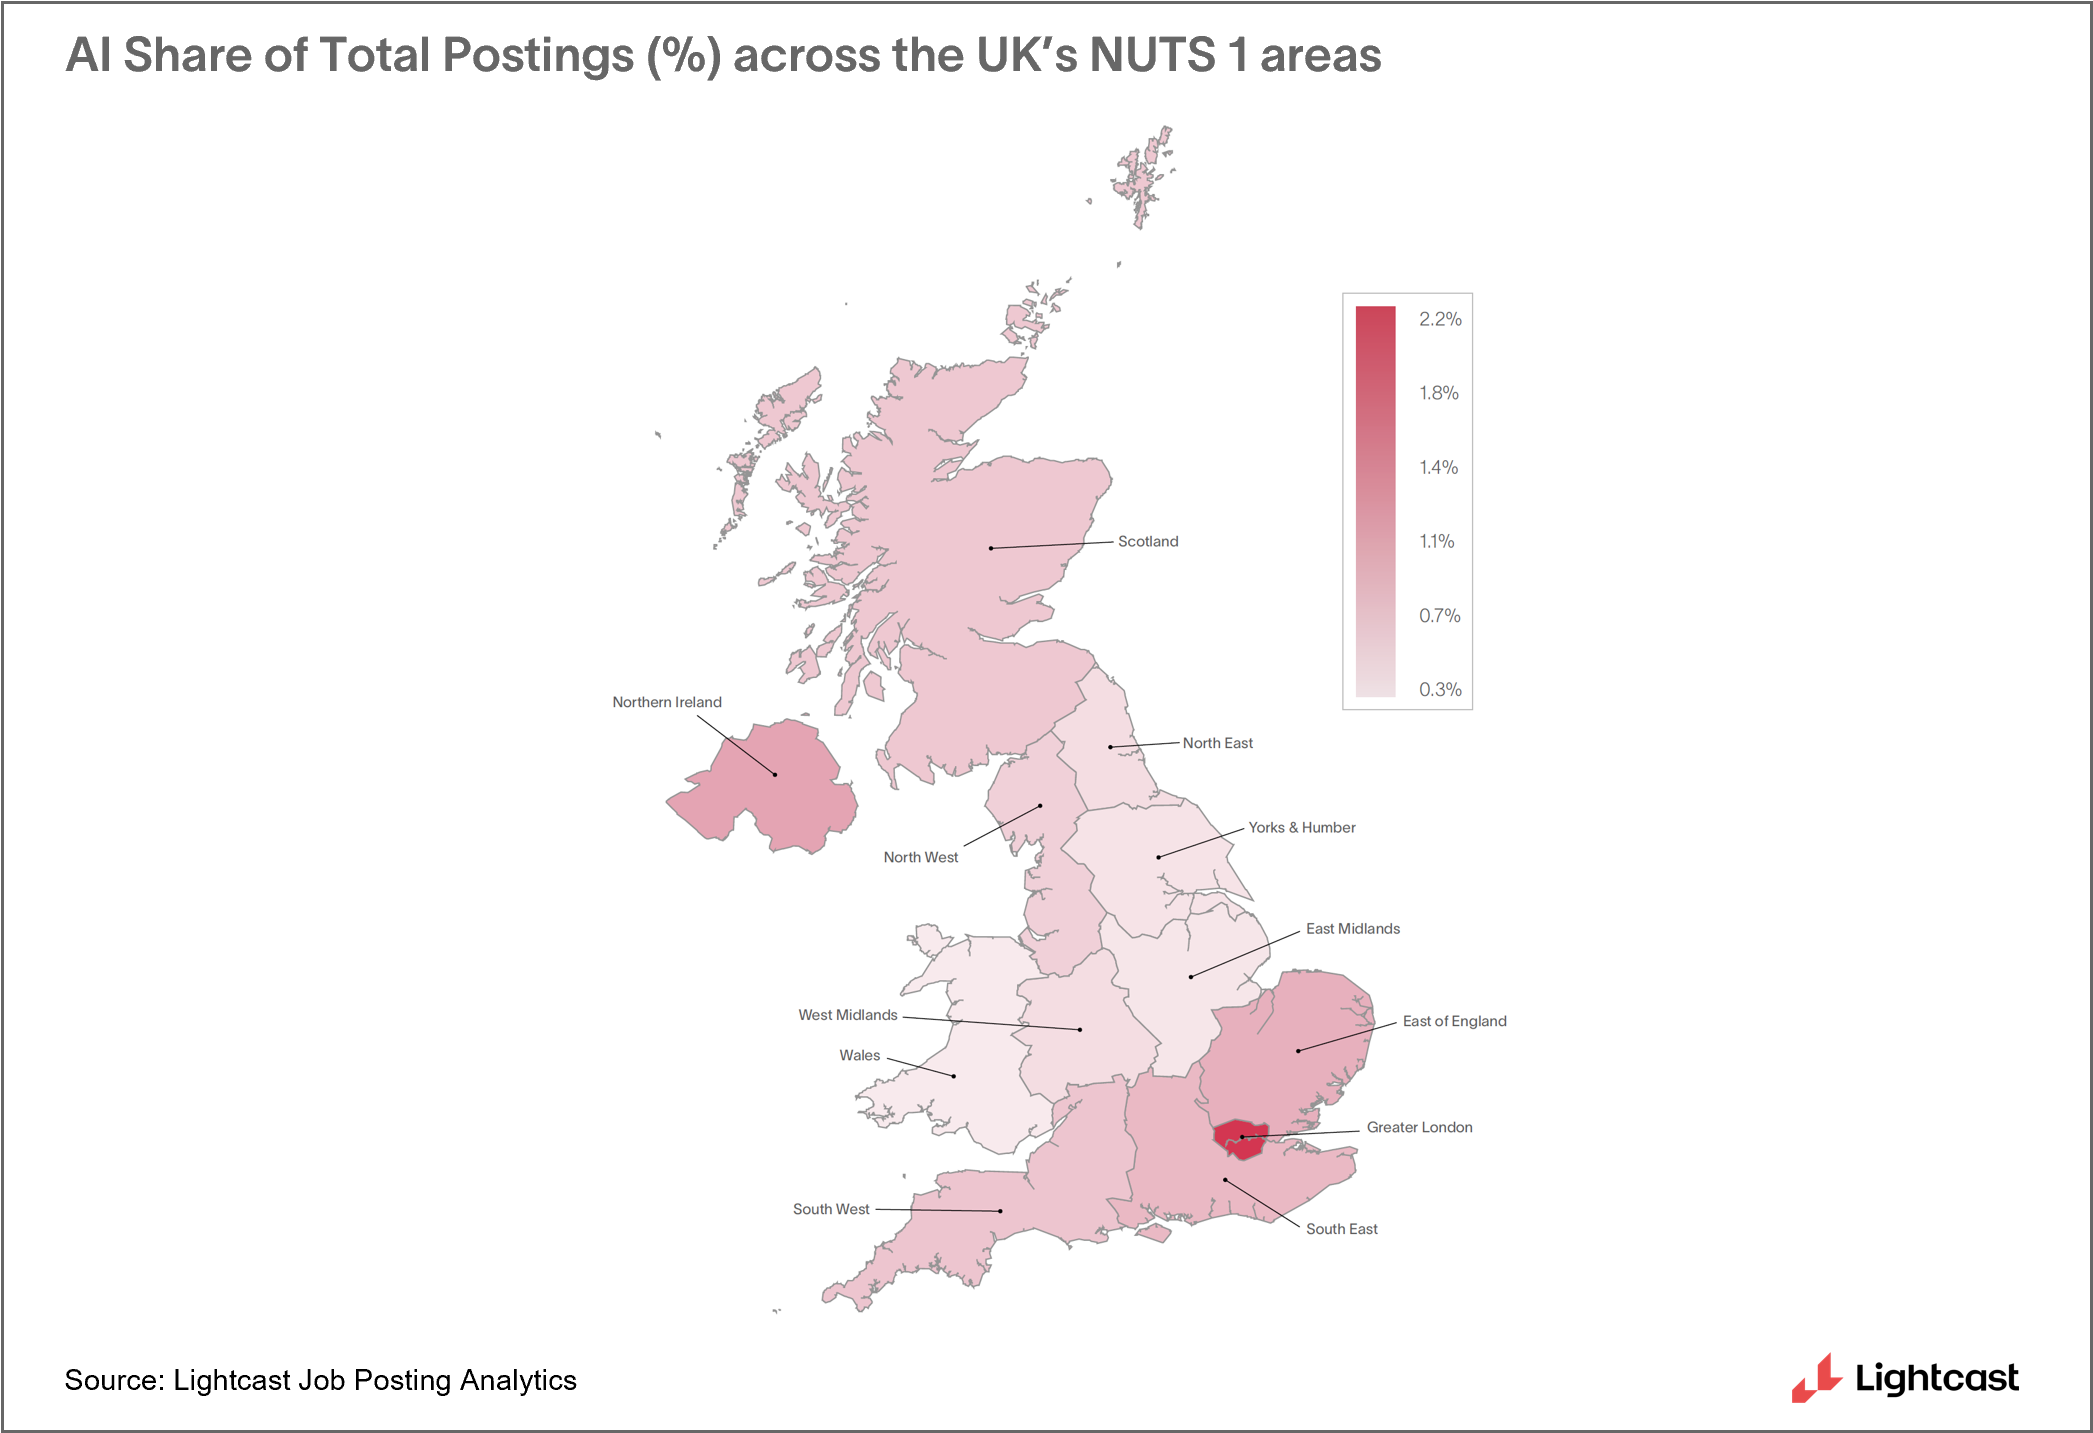 AI share of total postings across the UK's NUTS 1 areas